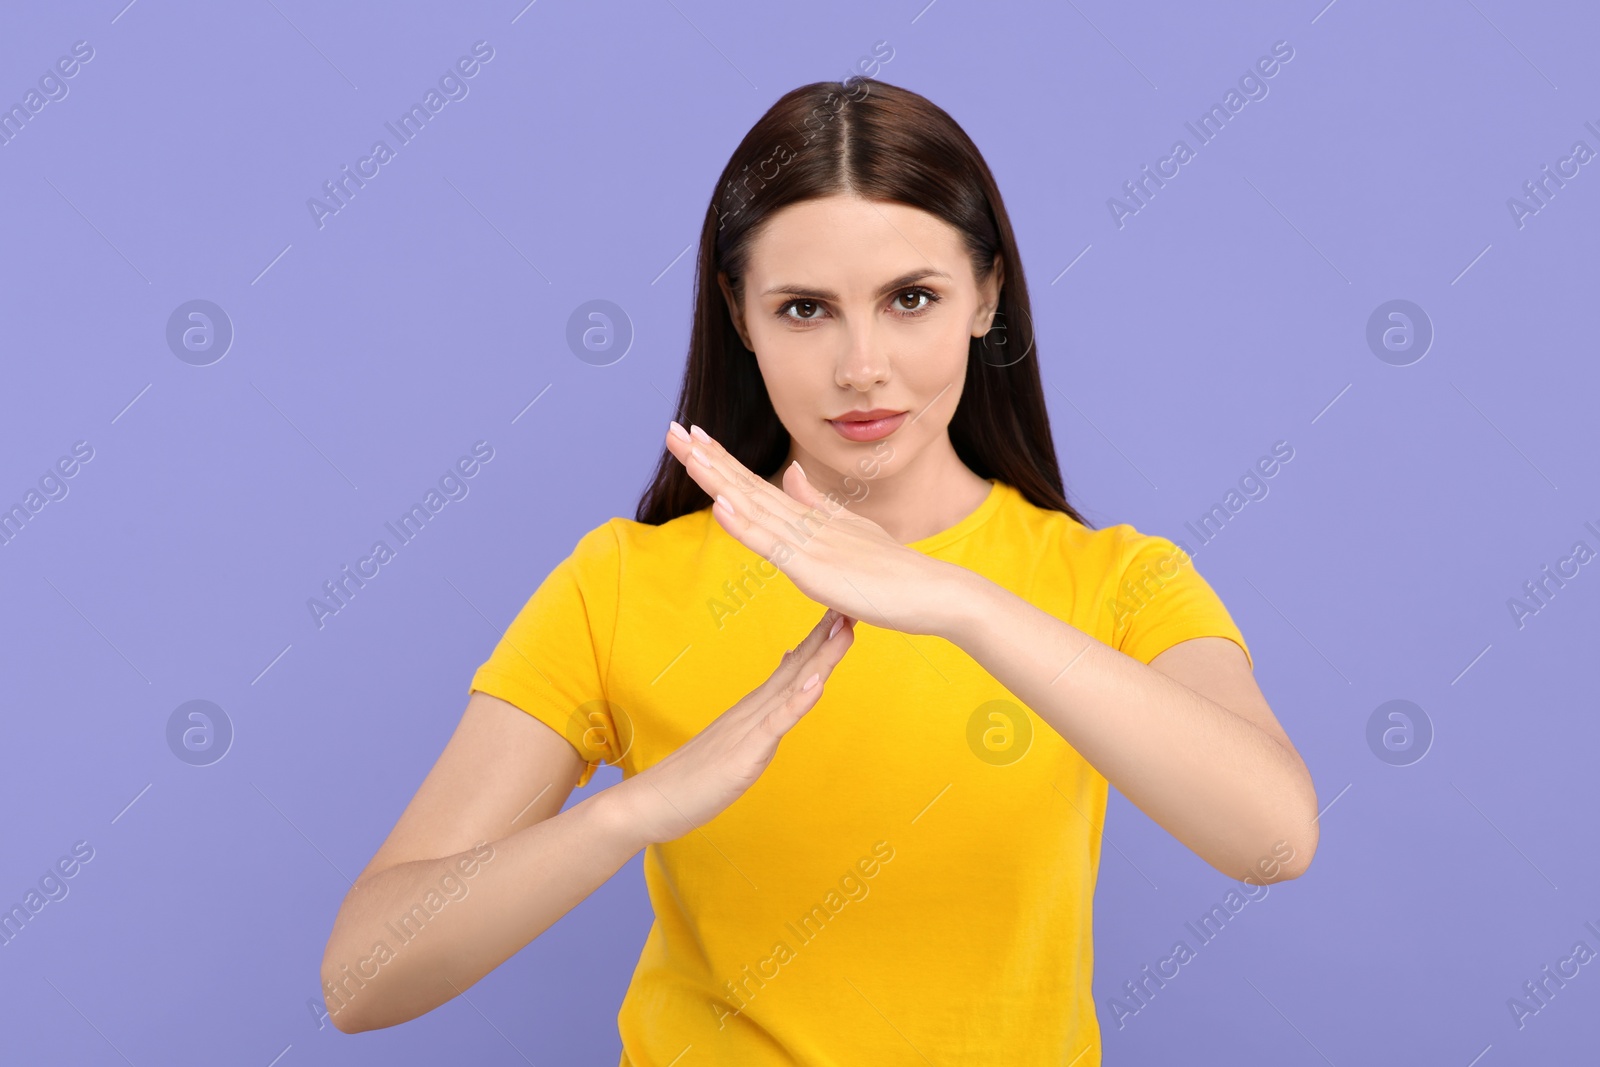 Photo of Woman showing time out gesture on violet background